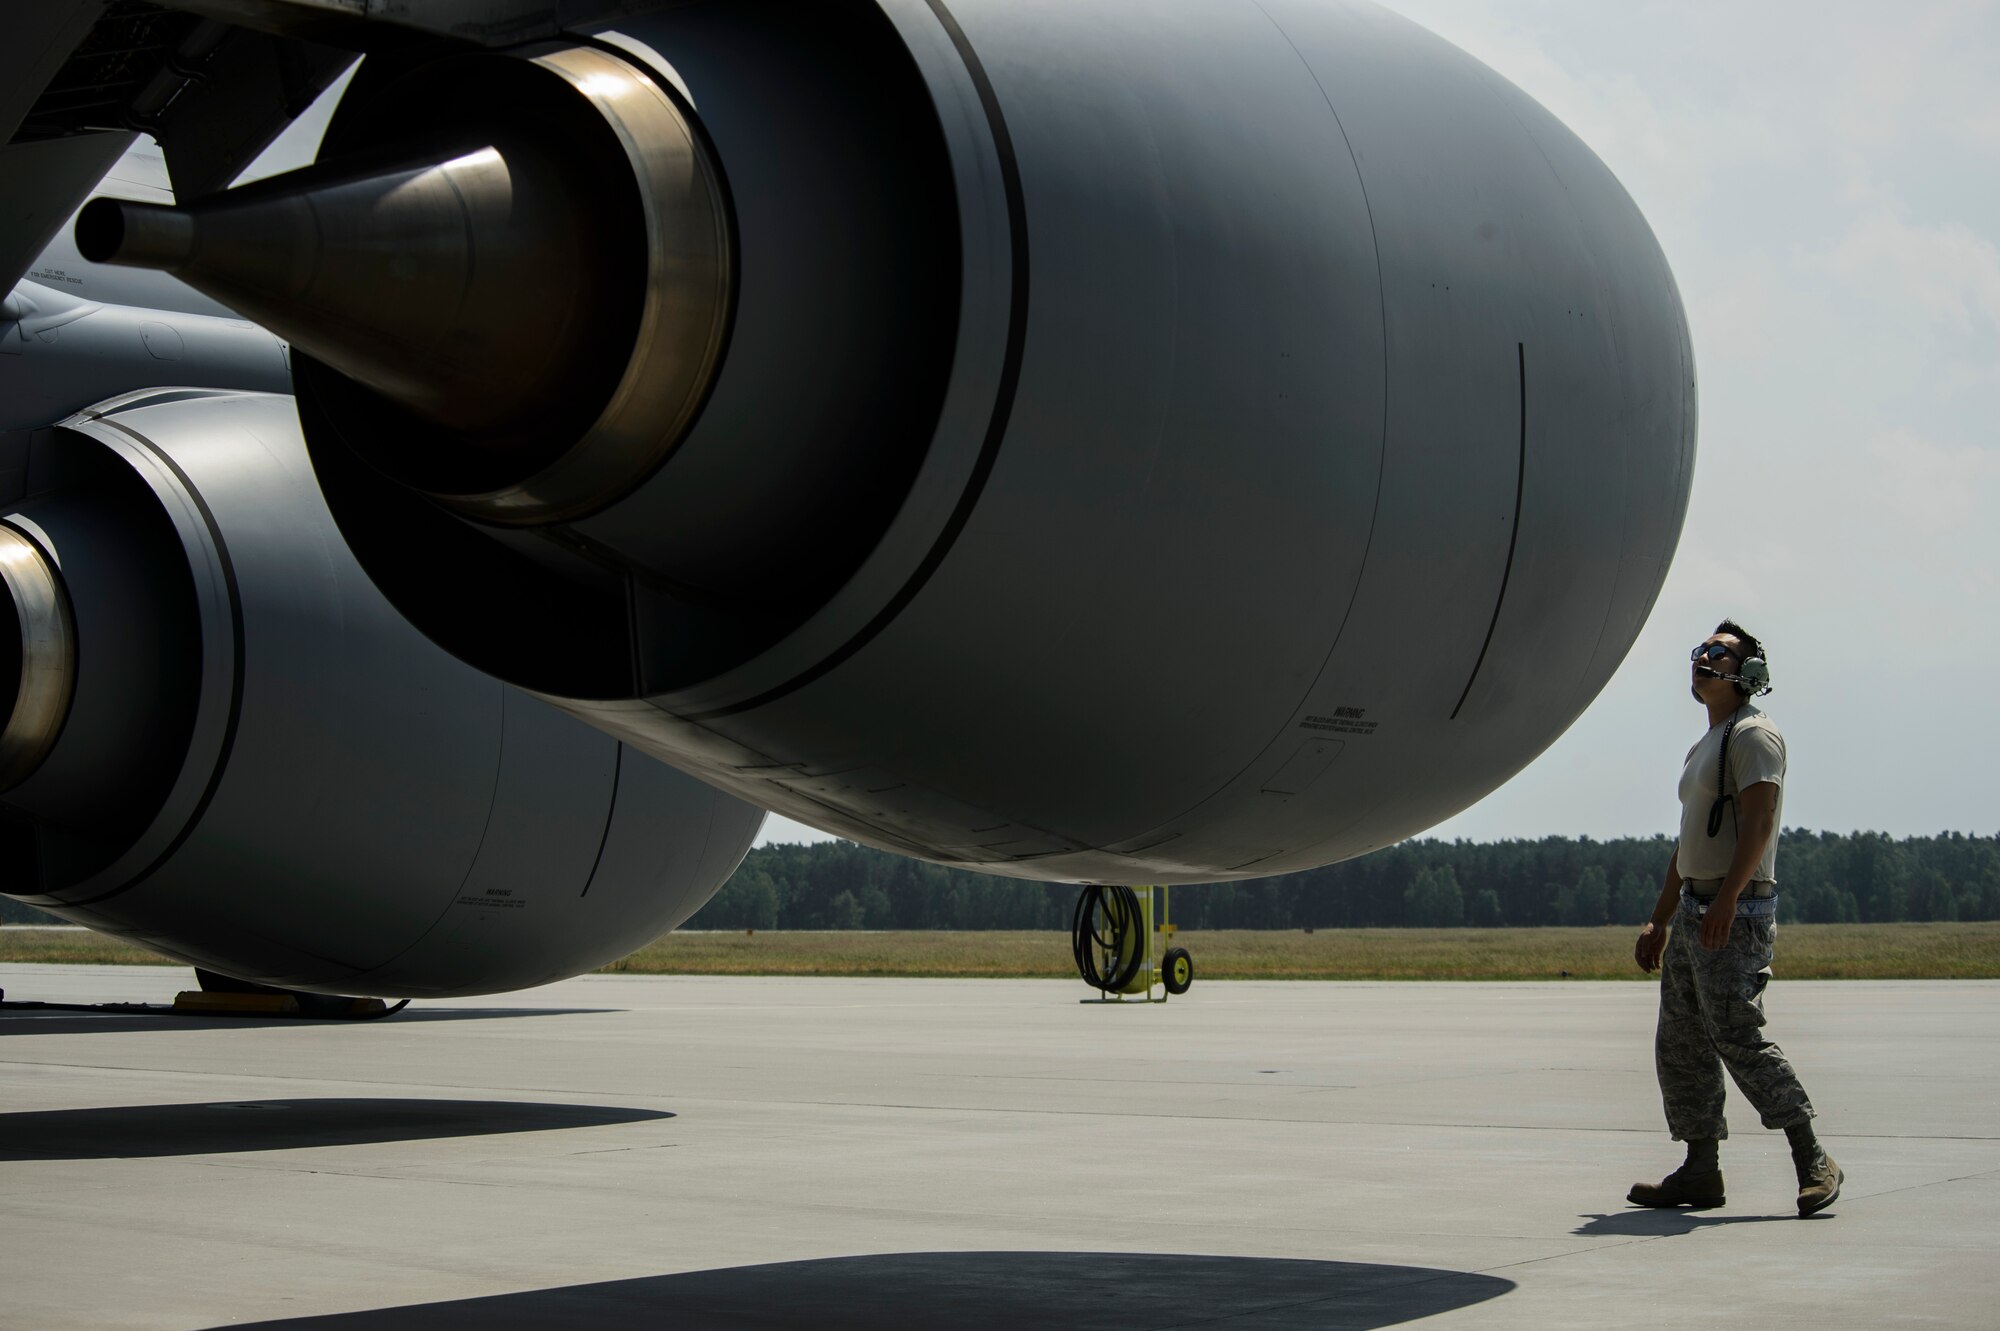 Tech. Sgt. Min An, 459th Aircraft Maintenance Squadron crew chief, is part of the Total Force Citizen Airmen team conducts a visual inspection of a KC-135R Stratotanker during BALTOPS exercise at Powidz Air Base, Poland, June 12, 2017. The exercise is designed to enhance flexibility and interoperability, to strengthen combined response capabilities, as well as demonstrate resolve among Allied and Partner Nations' forces to ensure stability in, and if necessary defend, the Baltic Sea region. (U.S. Air Force photo by Staff Sgt. Jonathan Snyder)